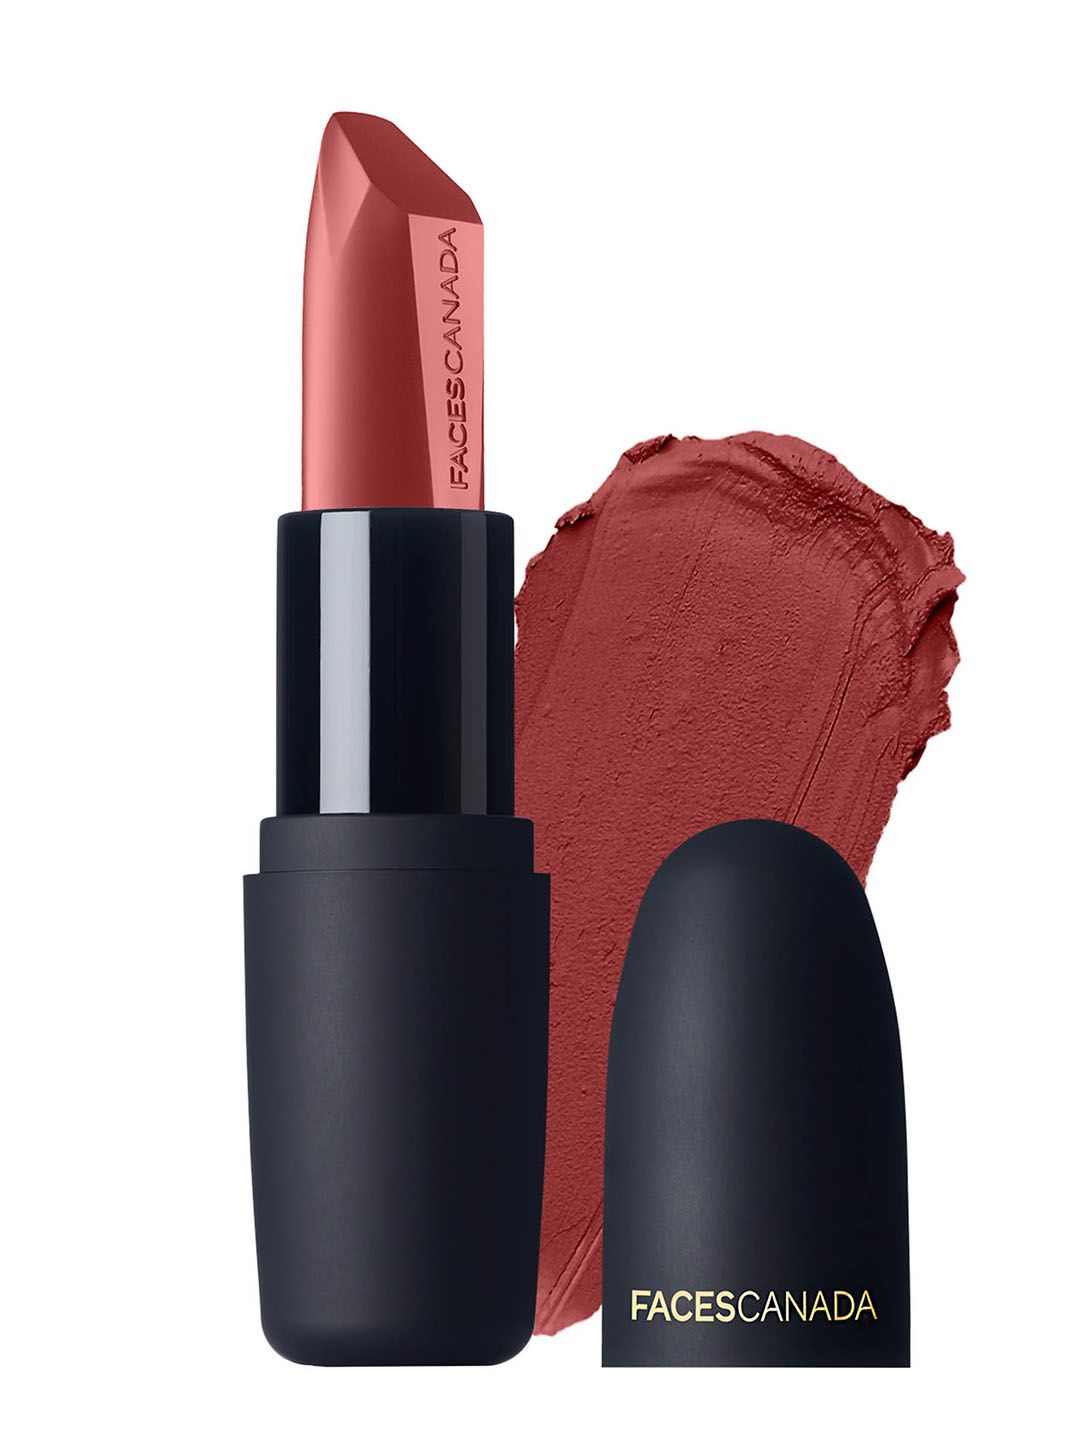 FACES CANADA Weightless Matte Finish Lipstick Forever Red 03 4gm Price in India